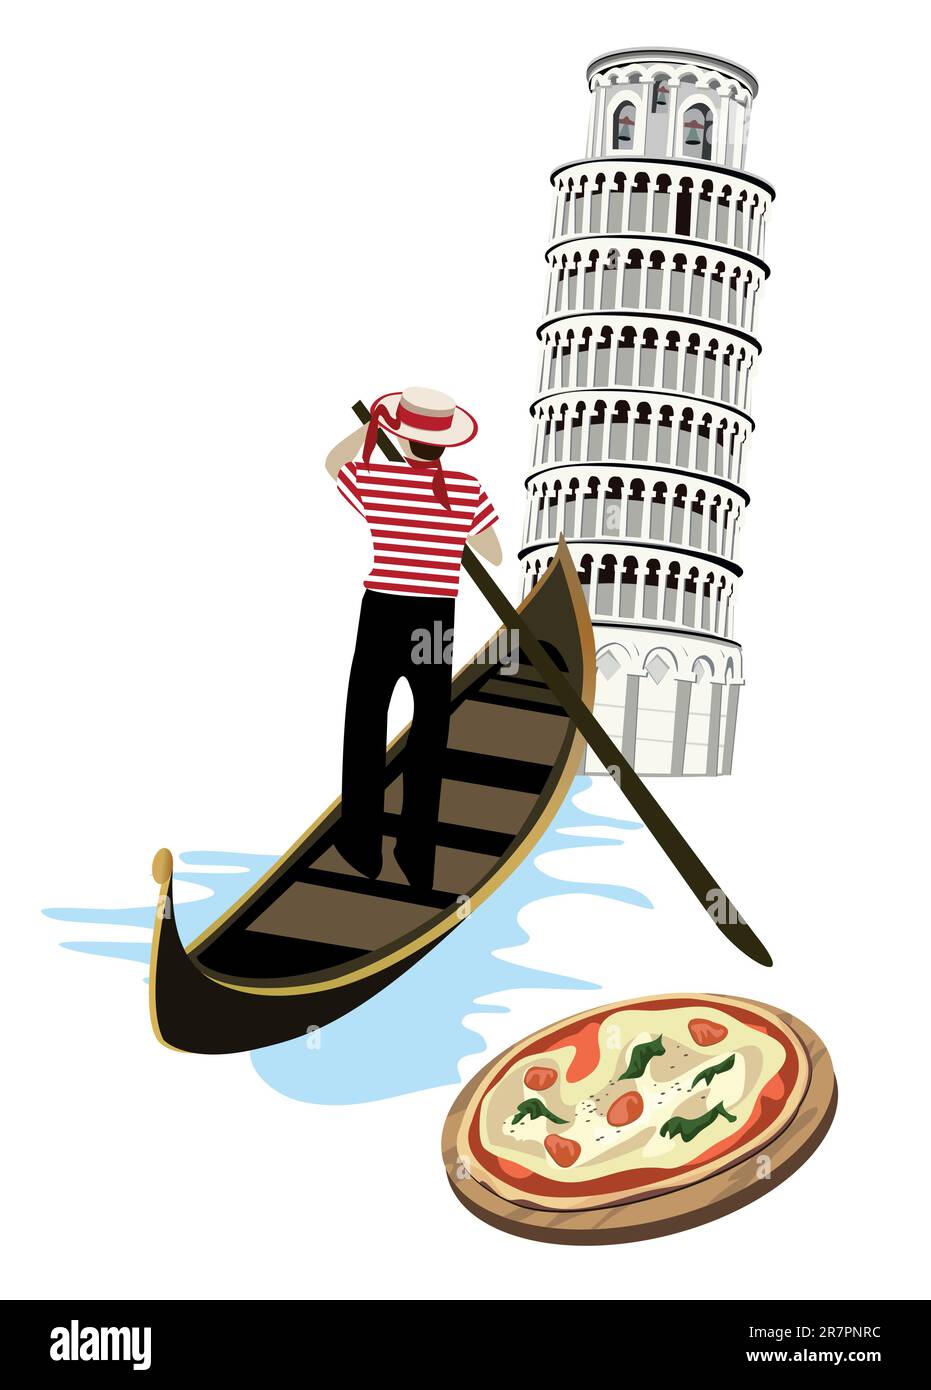 Symbols of Italy as Pisa tower, pizza and gondola Stock Vector